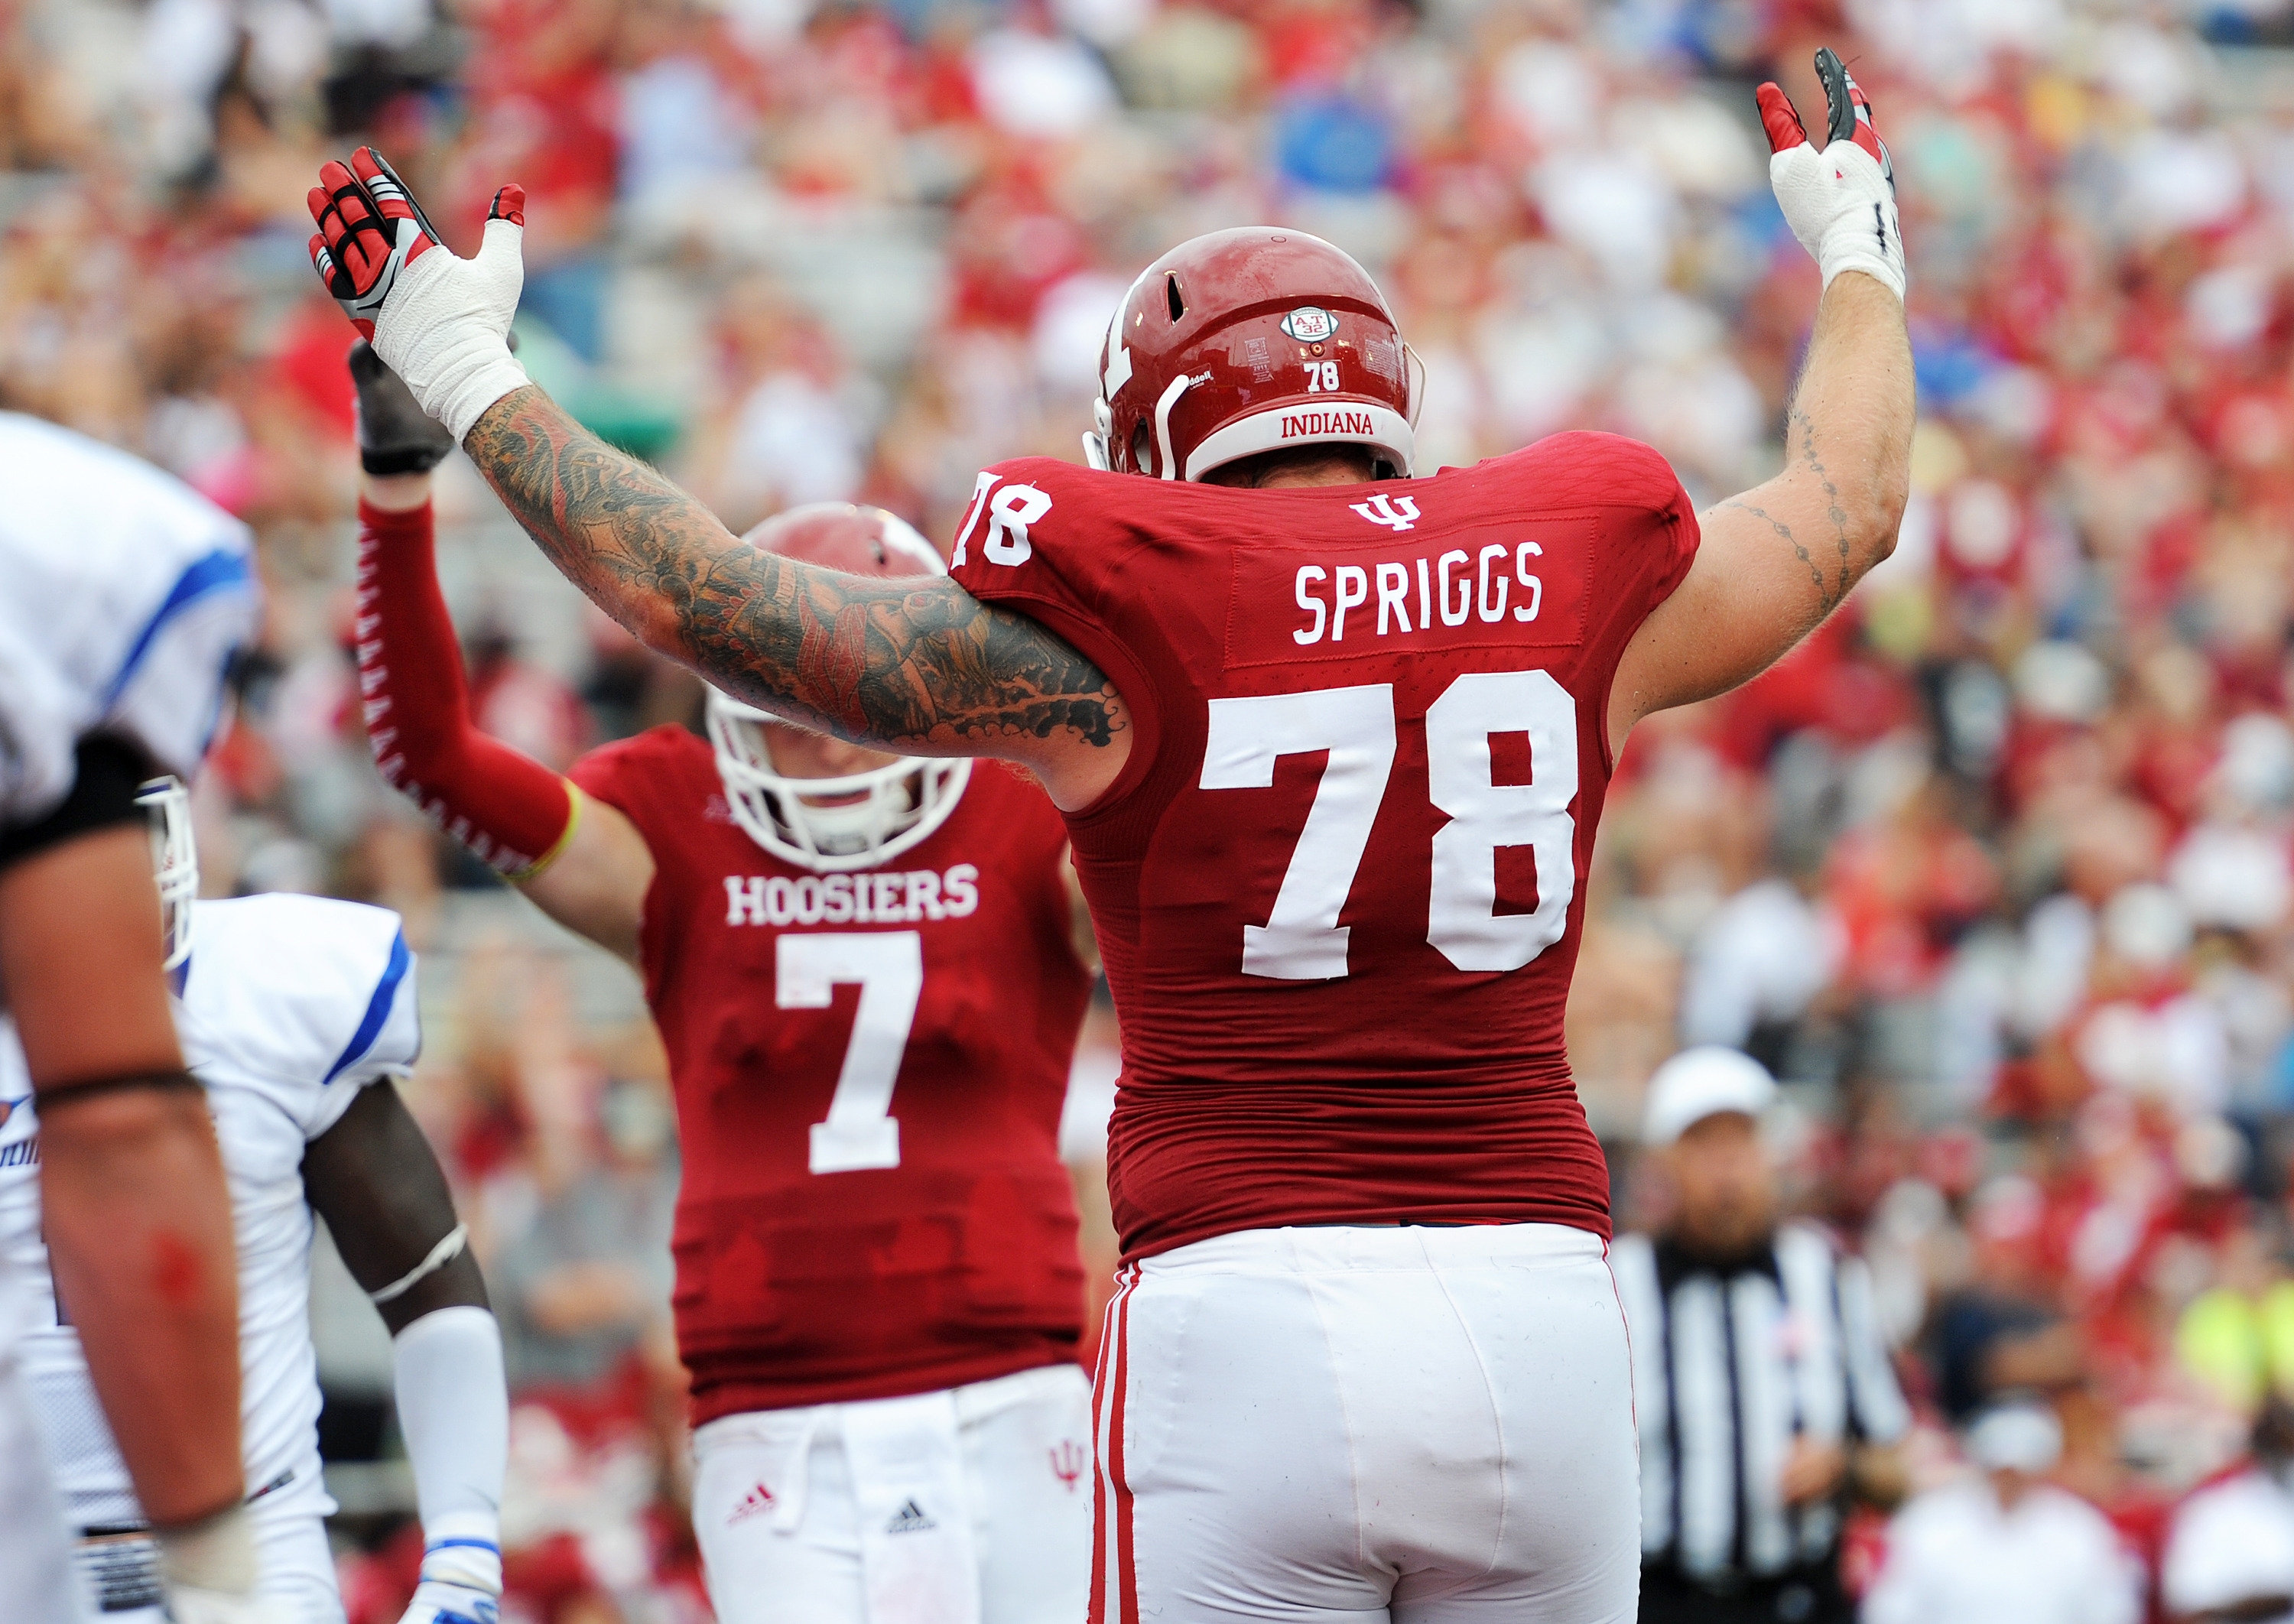 Packers trade up in 2nd round, take Indiana’s Jason Spriggs